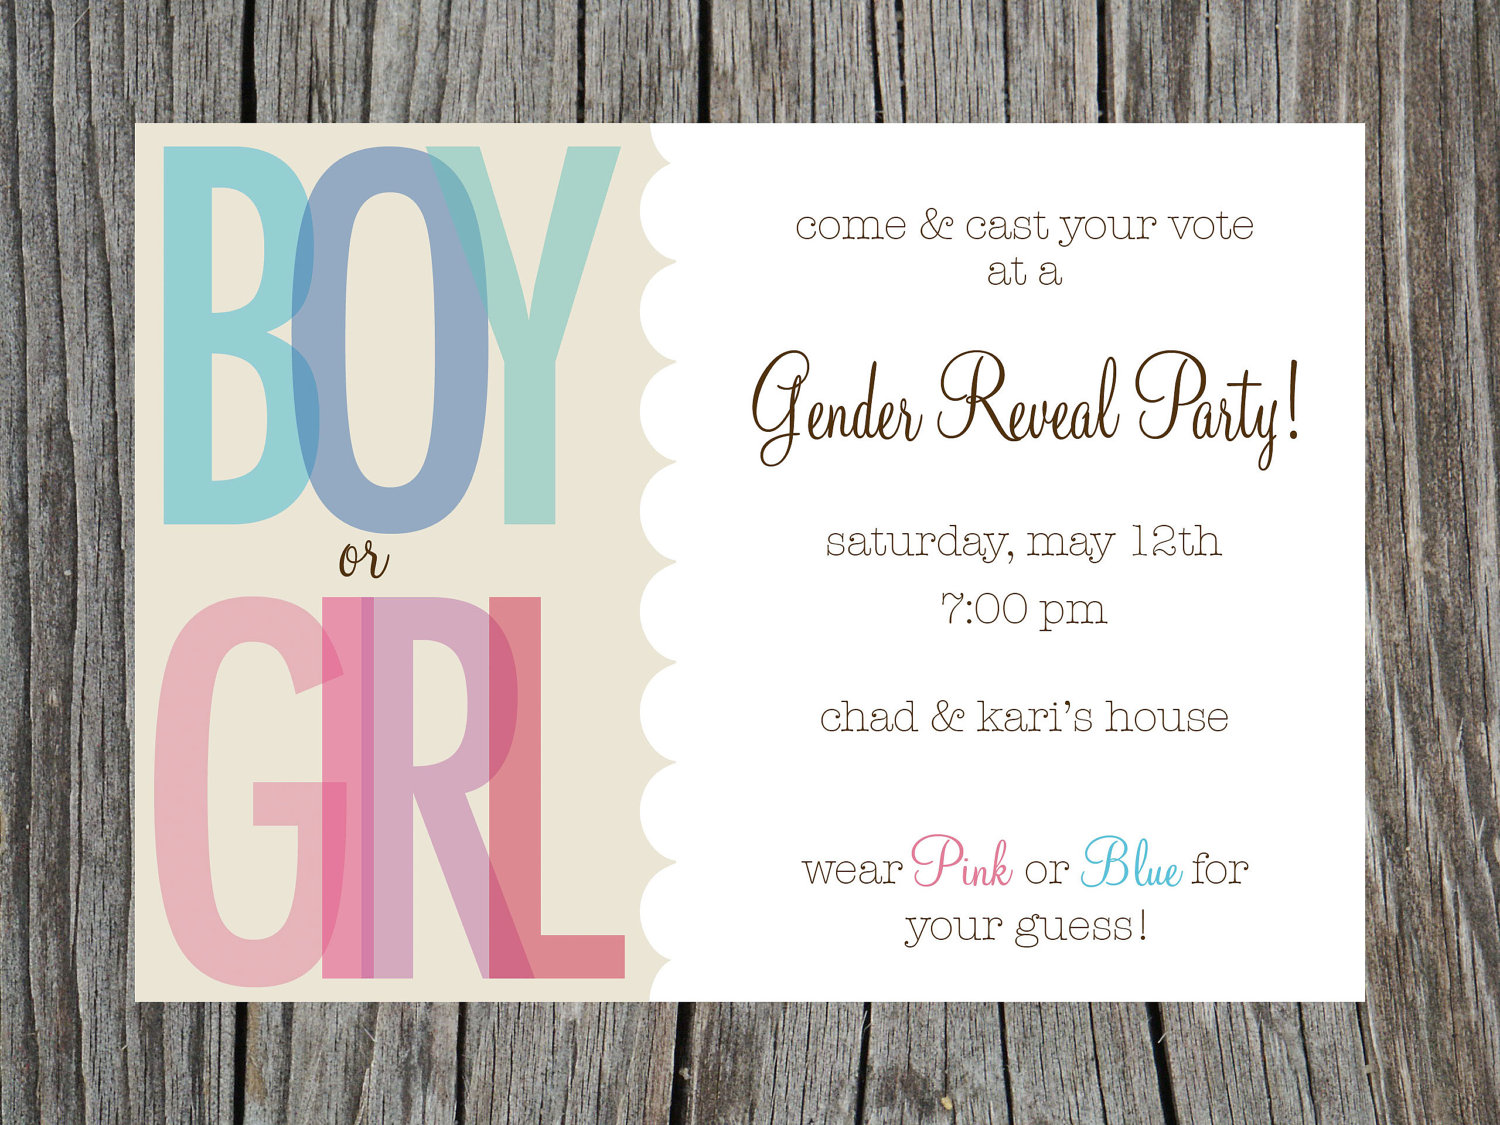 Gender reveal party invitation template